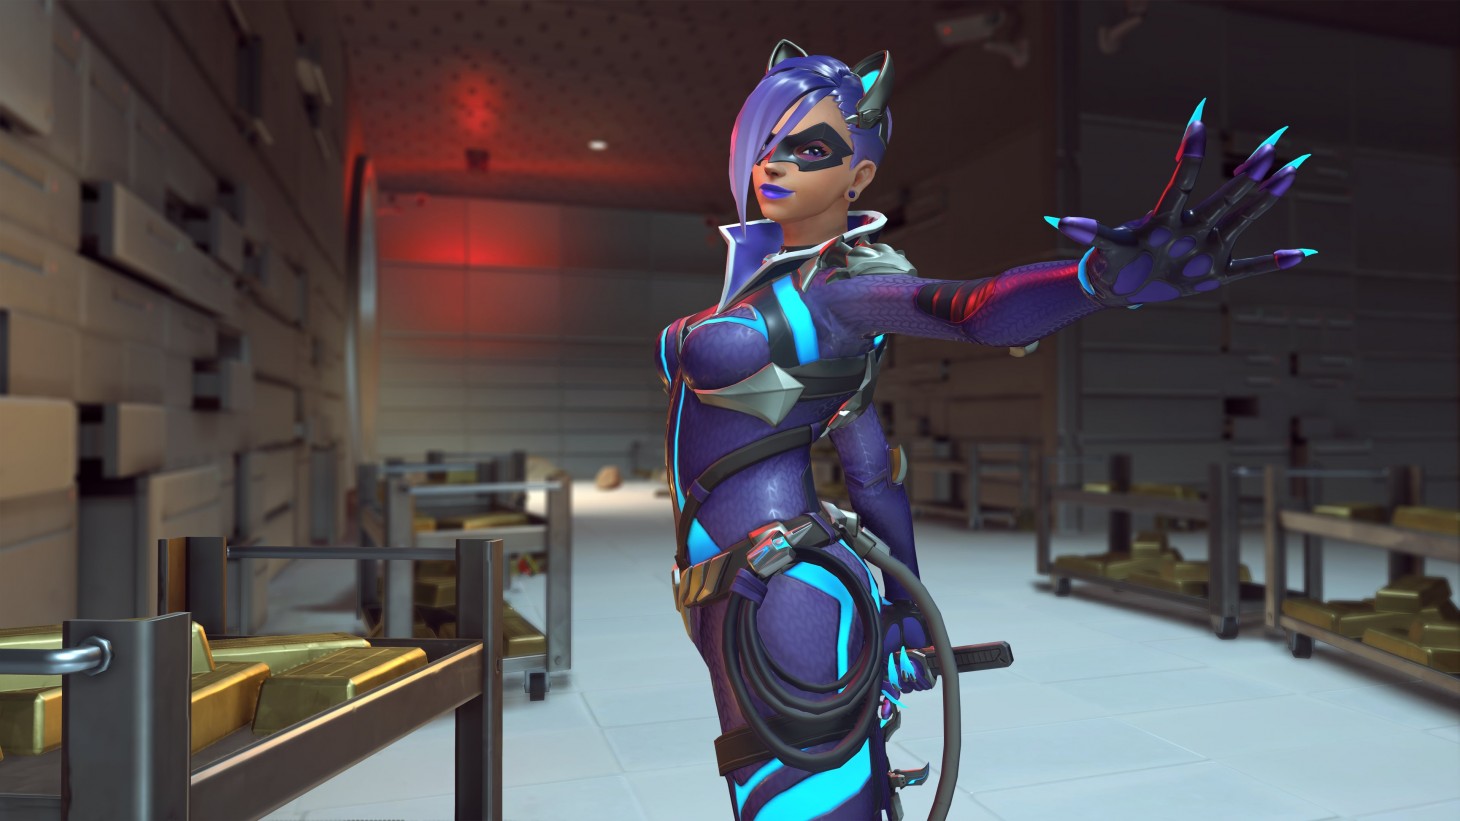 Overwatch Anniversary Event Brings Back Fan-Favorite Events, New Skins